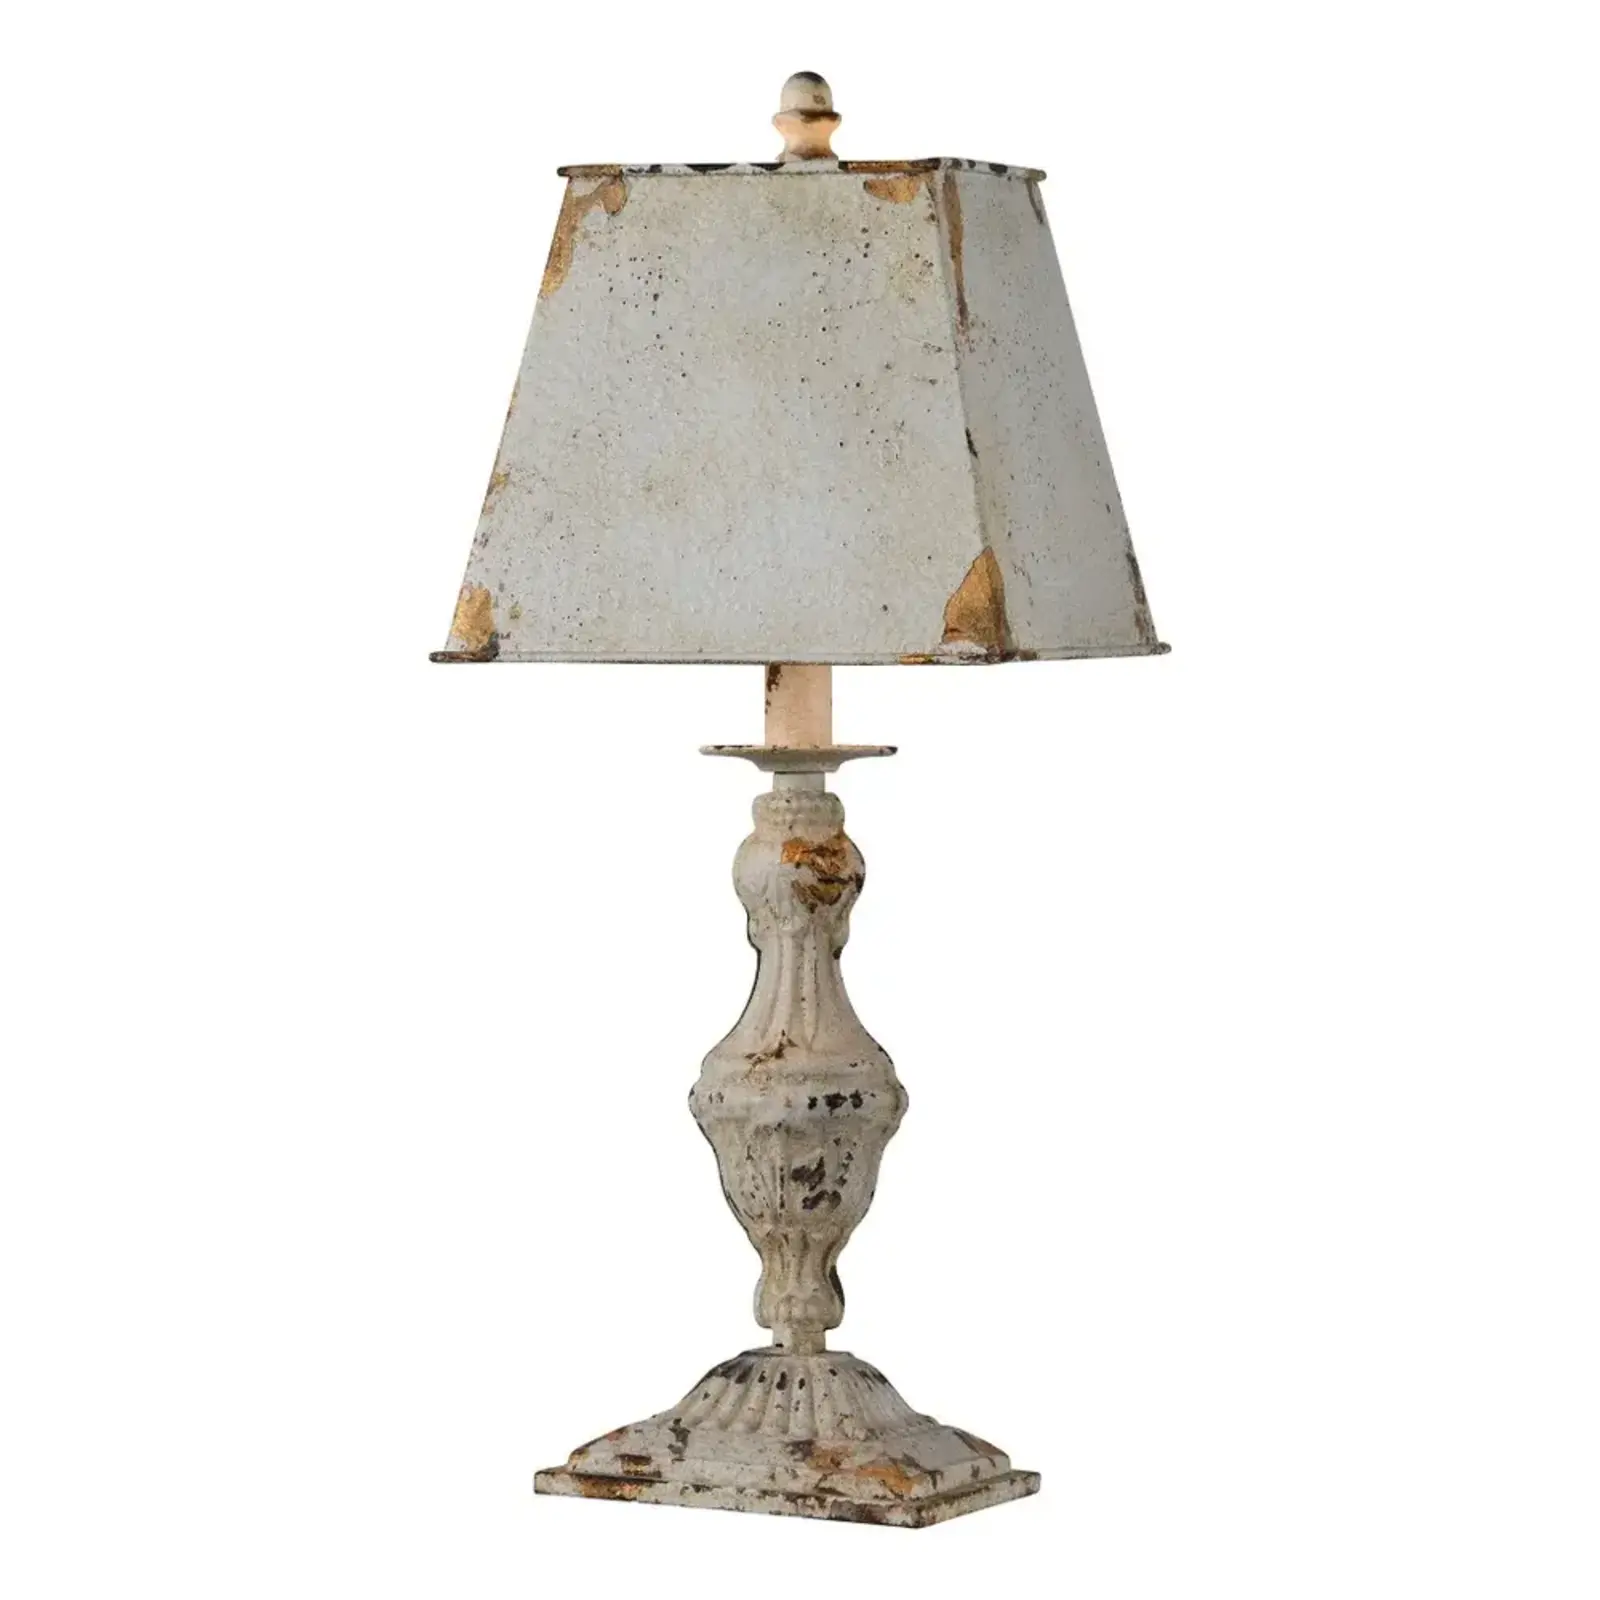 Forty West Lynn Table Lamp  22809 loading=